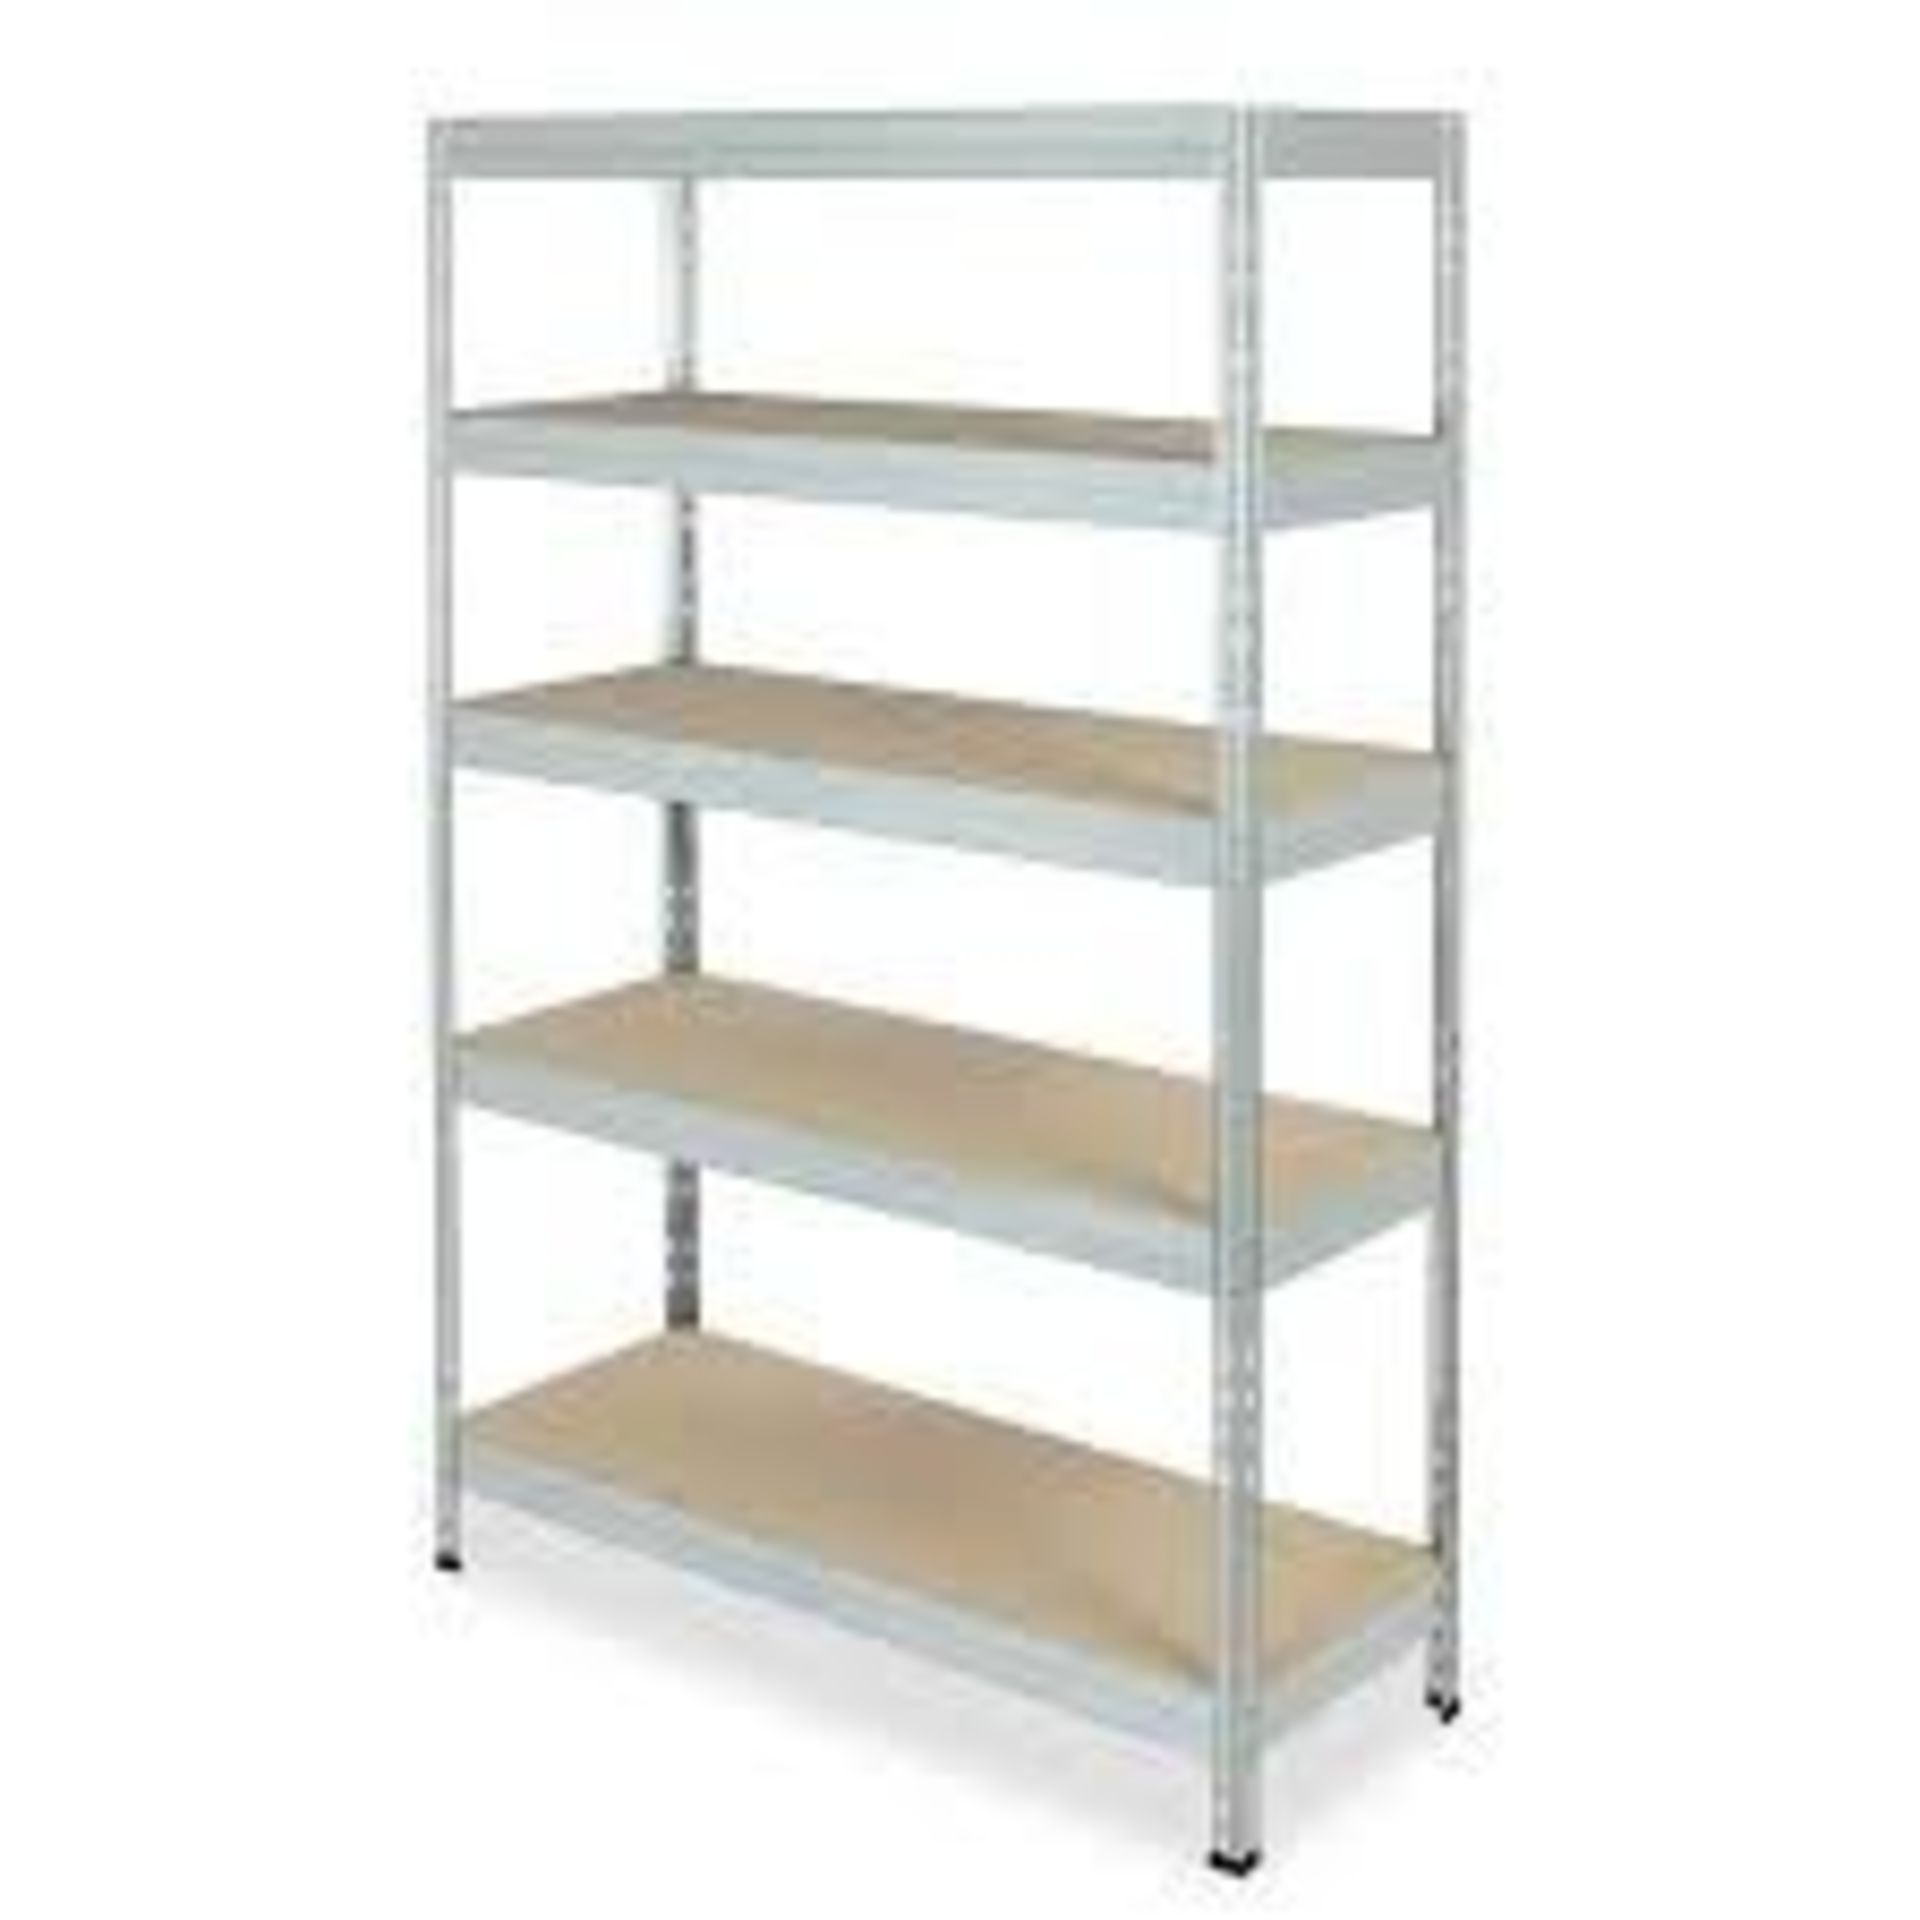 Full Artic Load including 448 items of various stock to include: Metal Shelfs, Coffee Tables, - Image 3 of 13